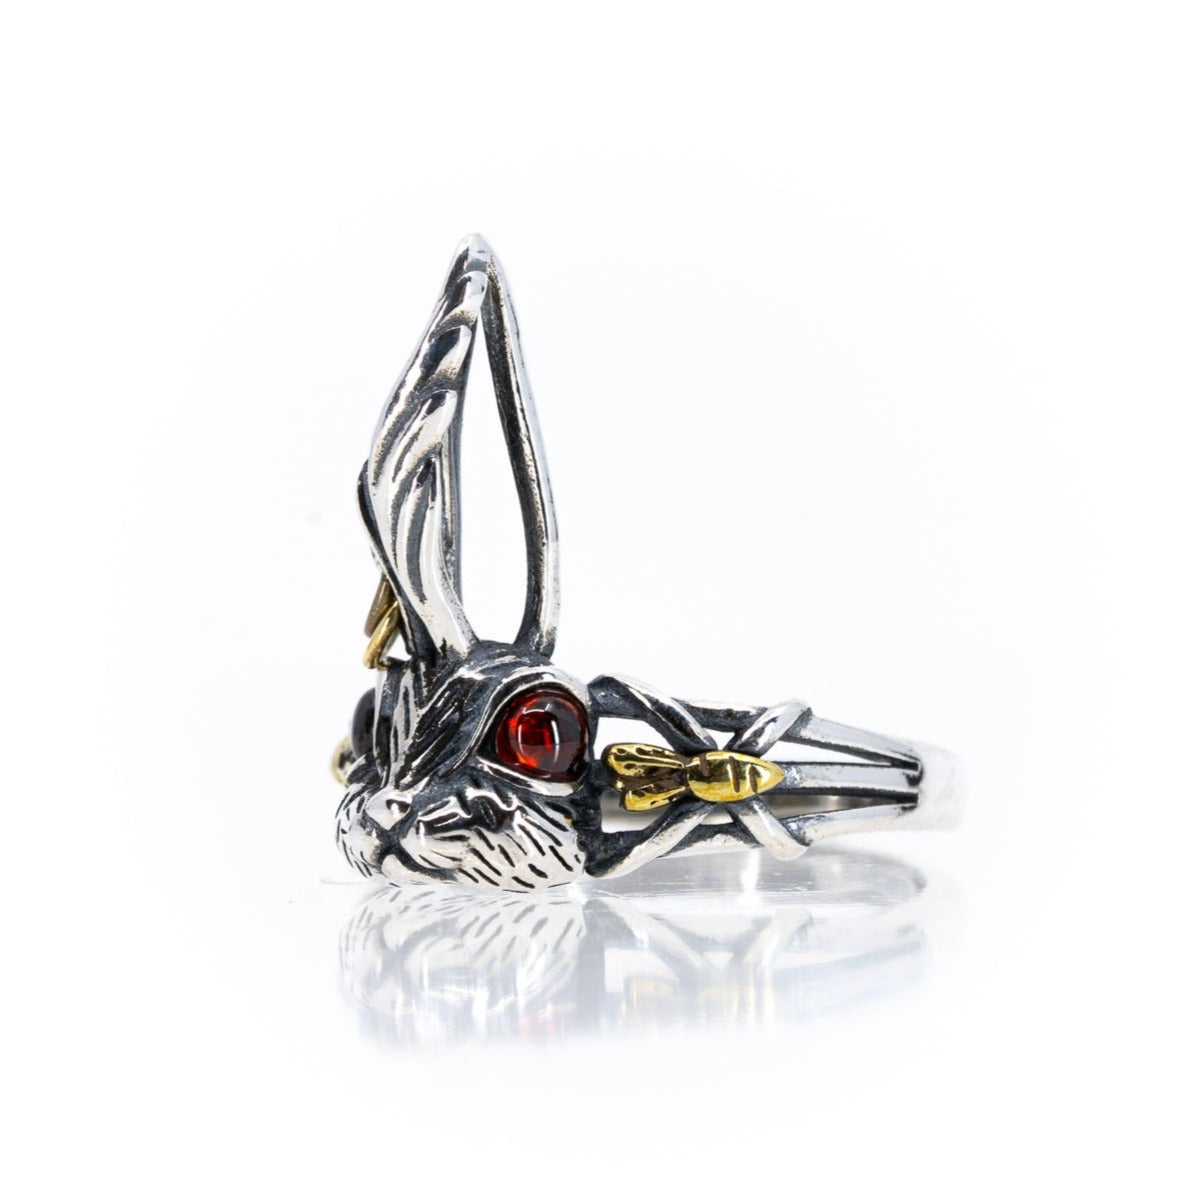 Red eyed rabbit ring with gold carrot detail - Black Feather Design